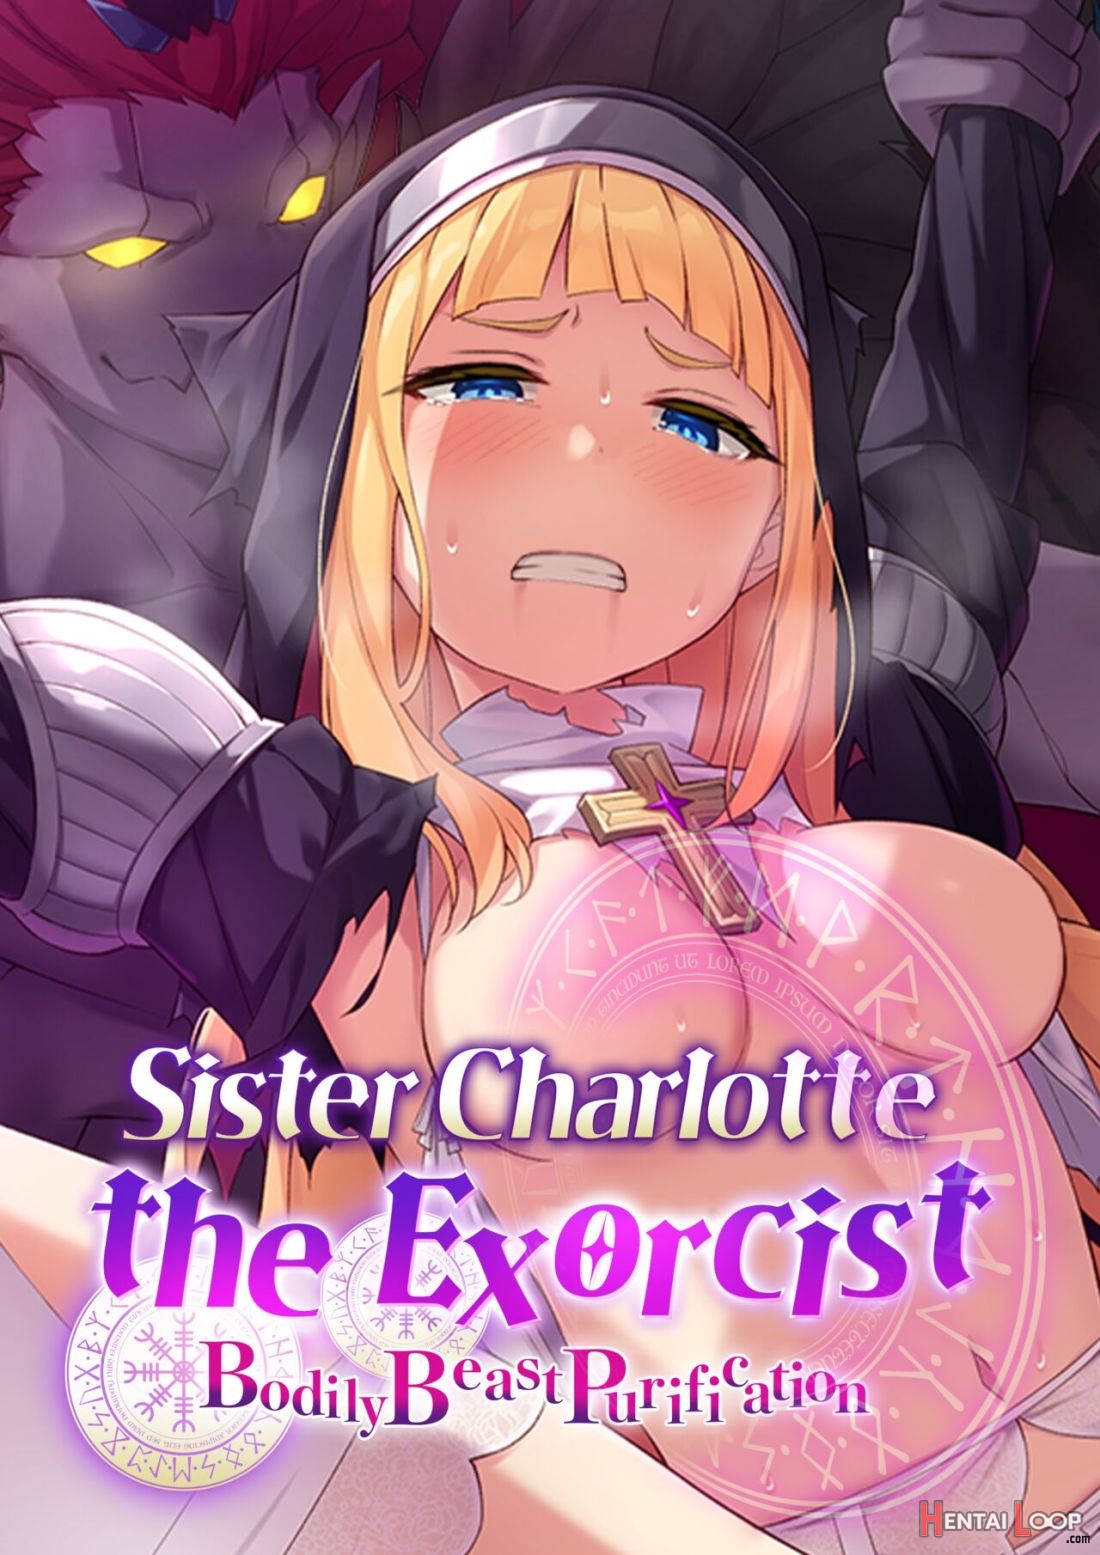 Sister Charlotte The Exorcist ~bodily Beast Purification~ page 1